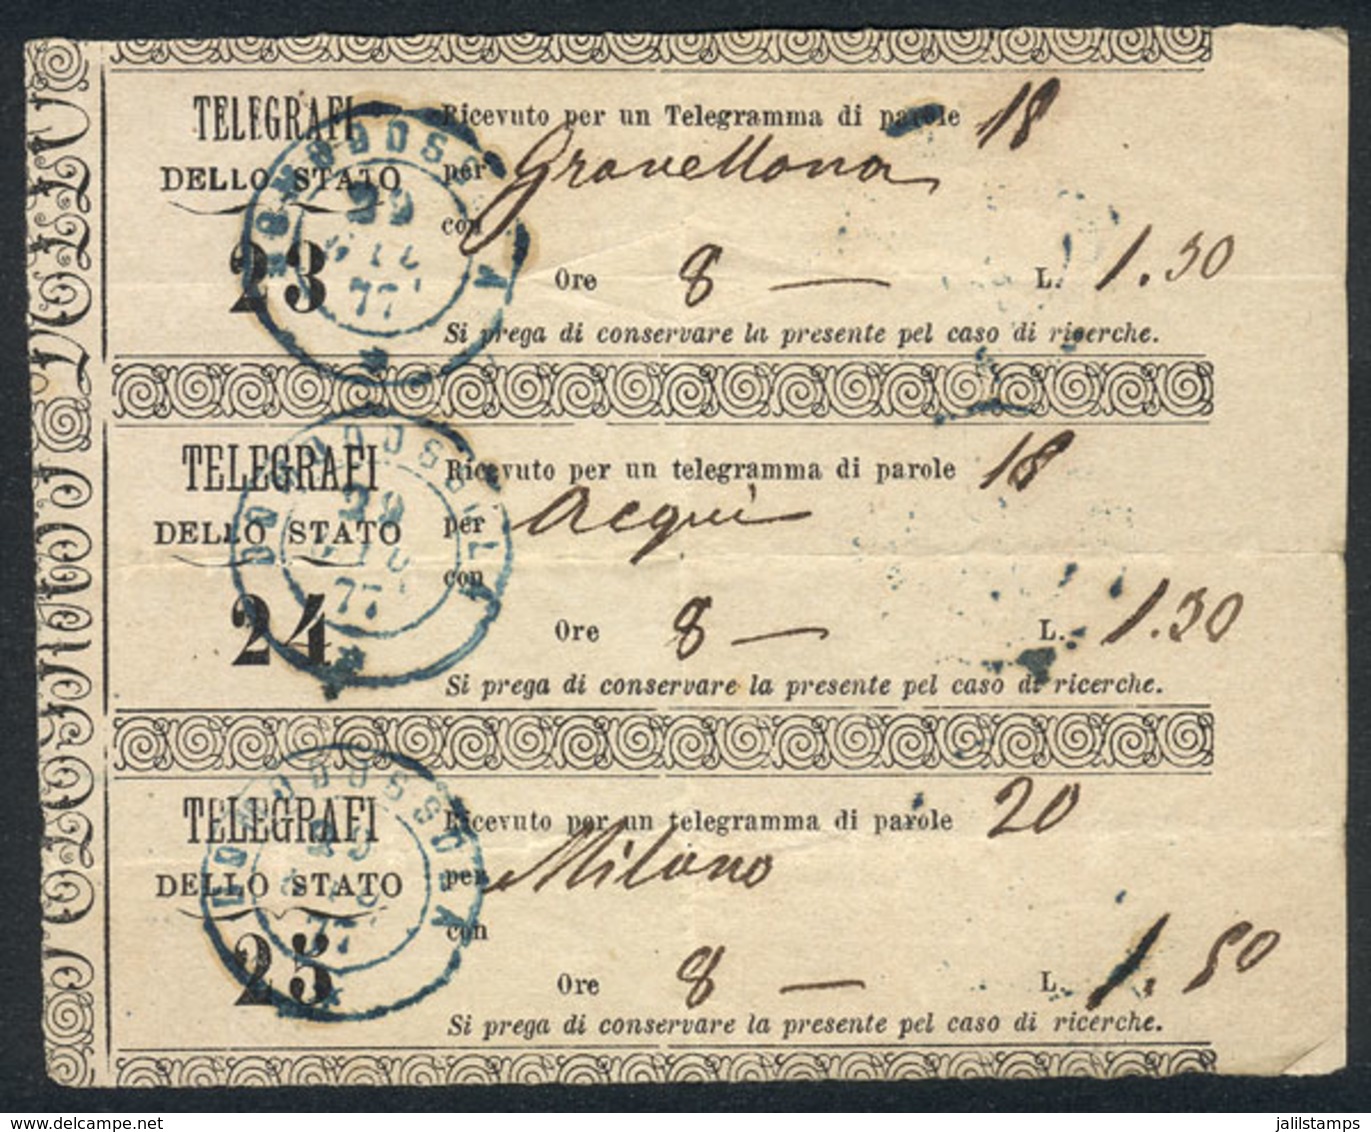 ITALY: 3 Receipts Of Telegrams Sent From DOMODOSSOLA To Different Towns On 29/JUL/1877, VF Quality, Rare! - Ohne Zuordnung